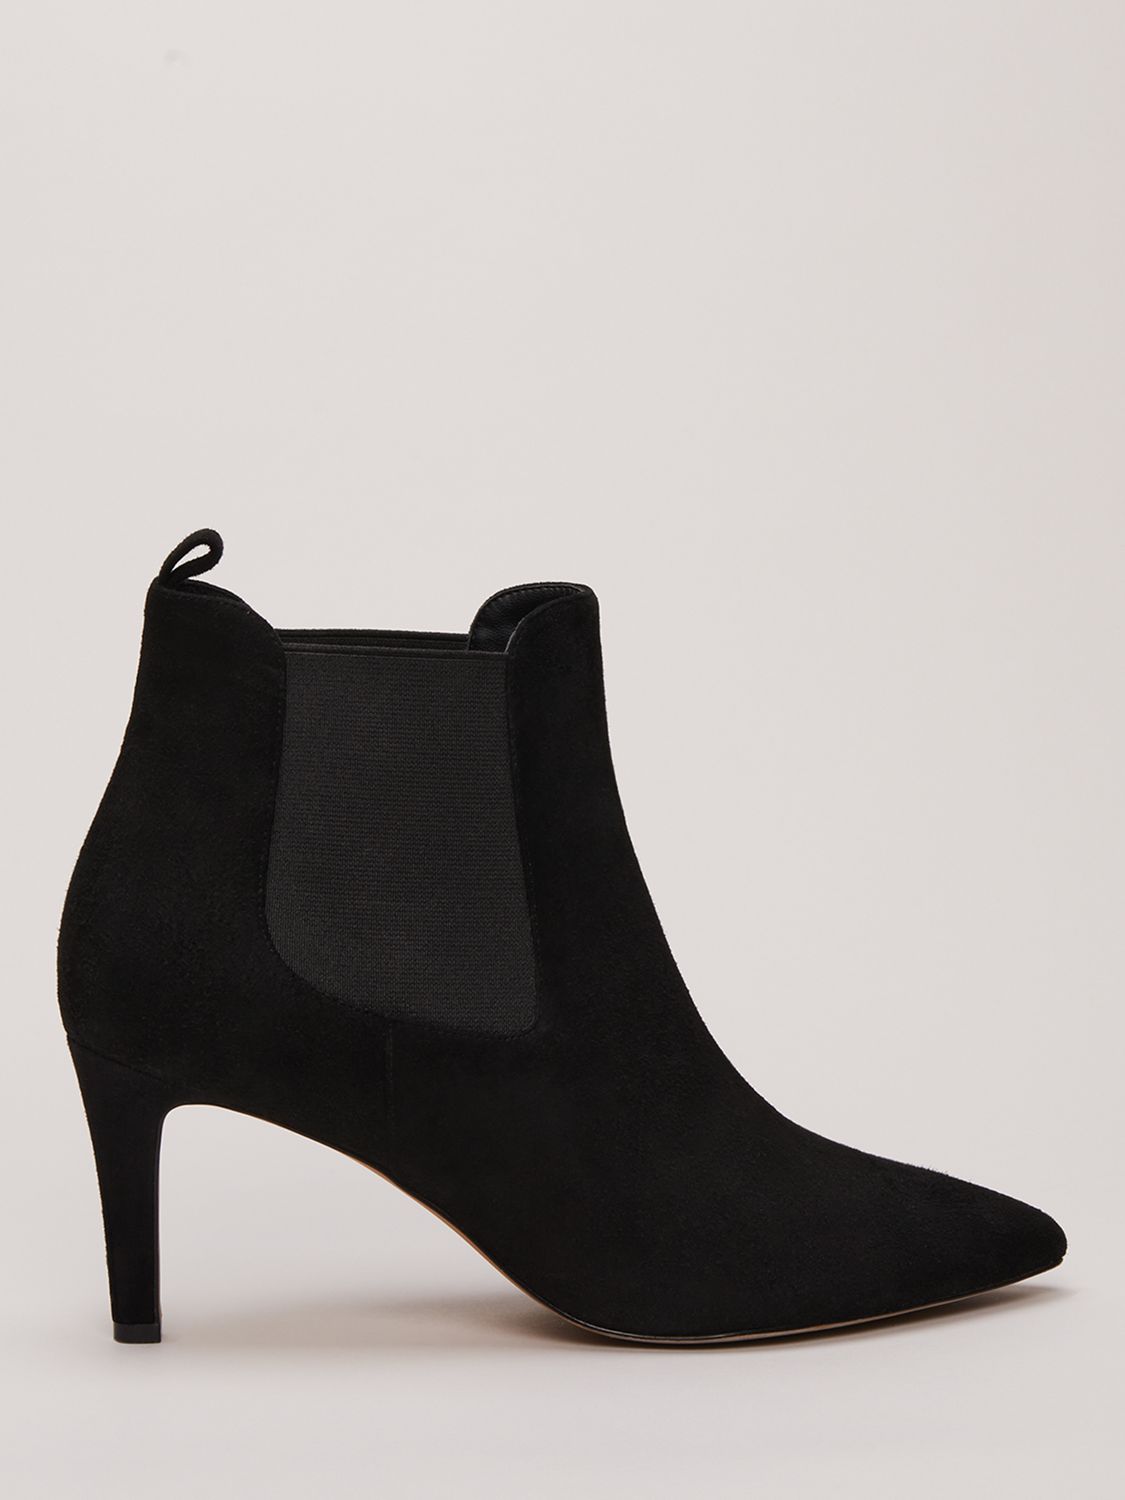 Buy Phase Eight Suede Ankle Boots, Black Online at johnlewis.com